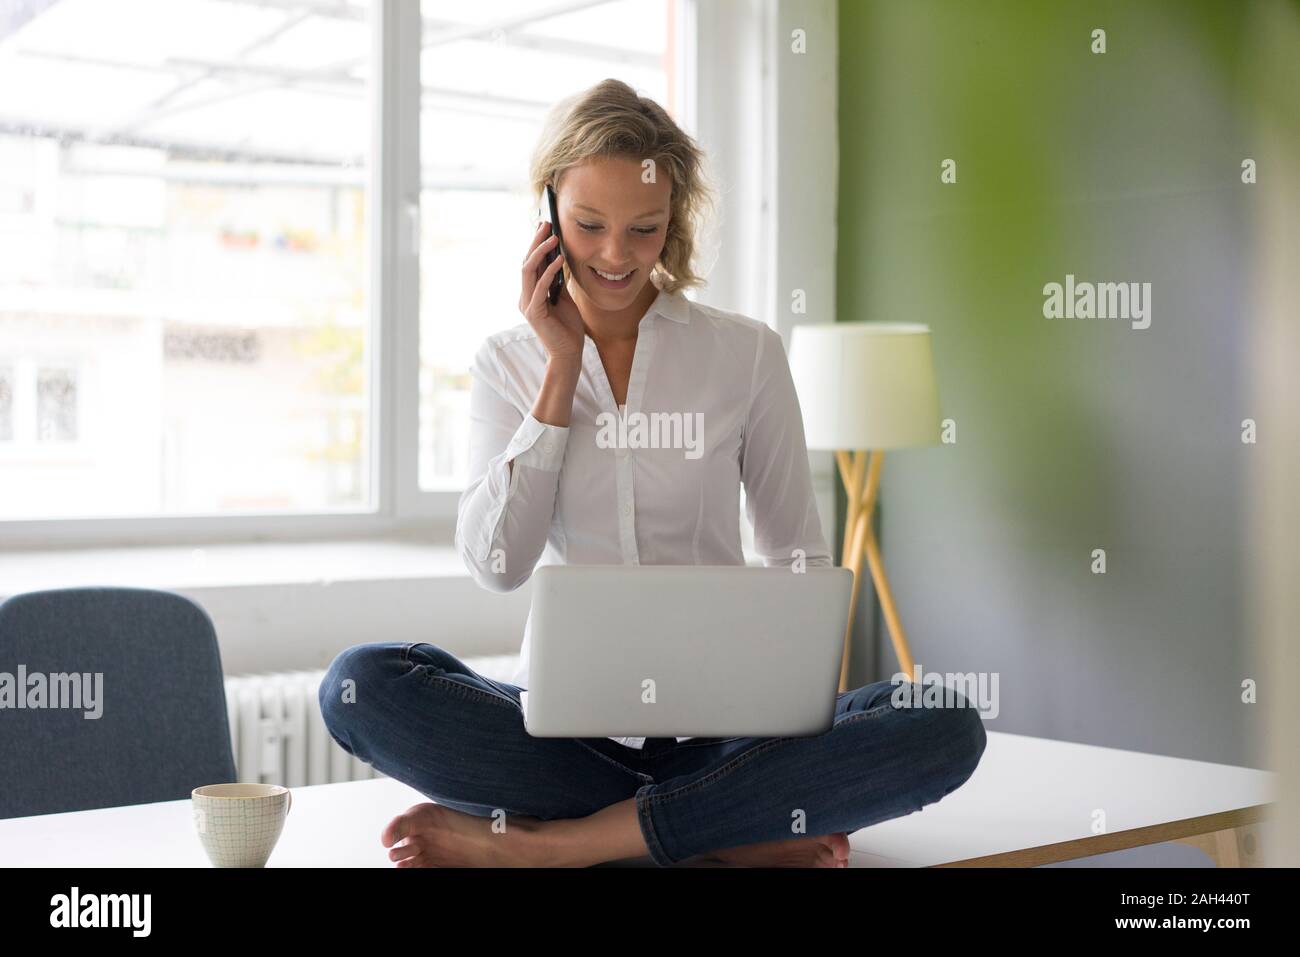 Smiling young businesswoman sitting on desk in office using laptop and cell phone Stock Photo